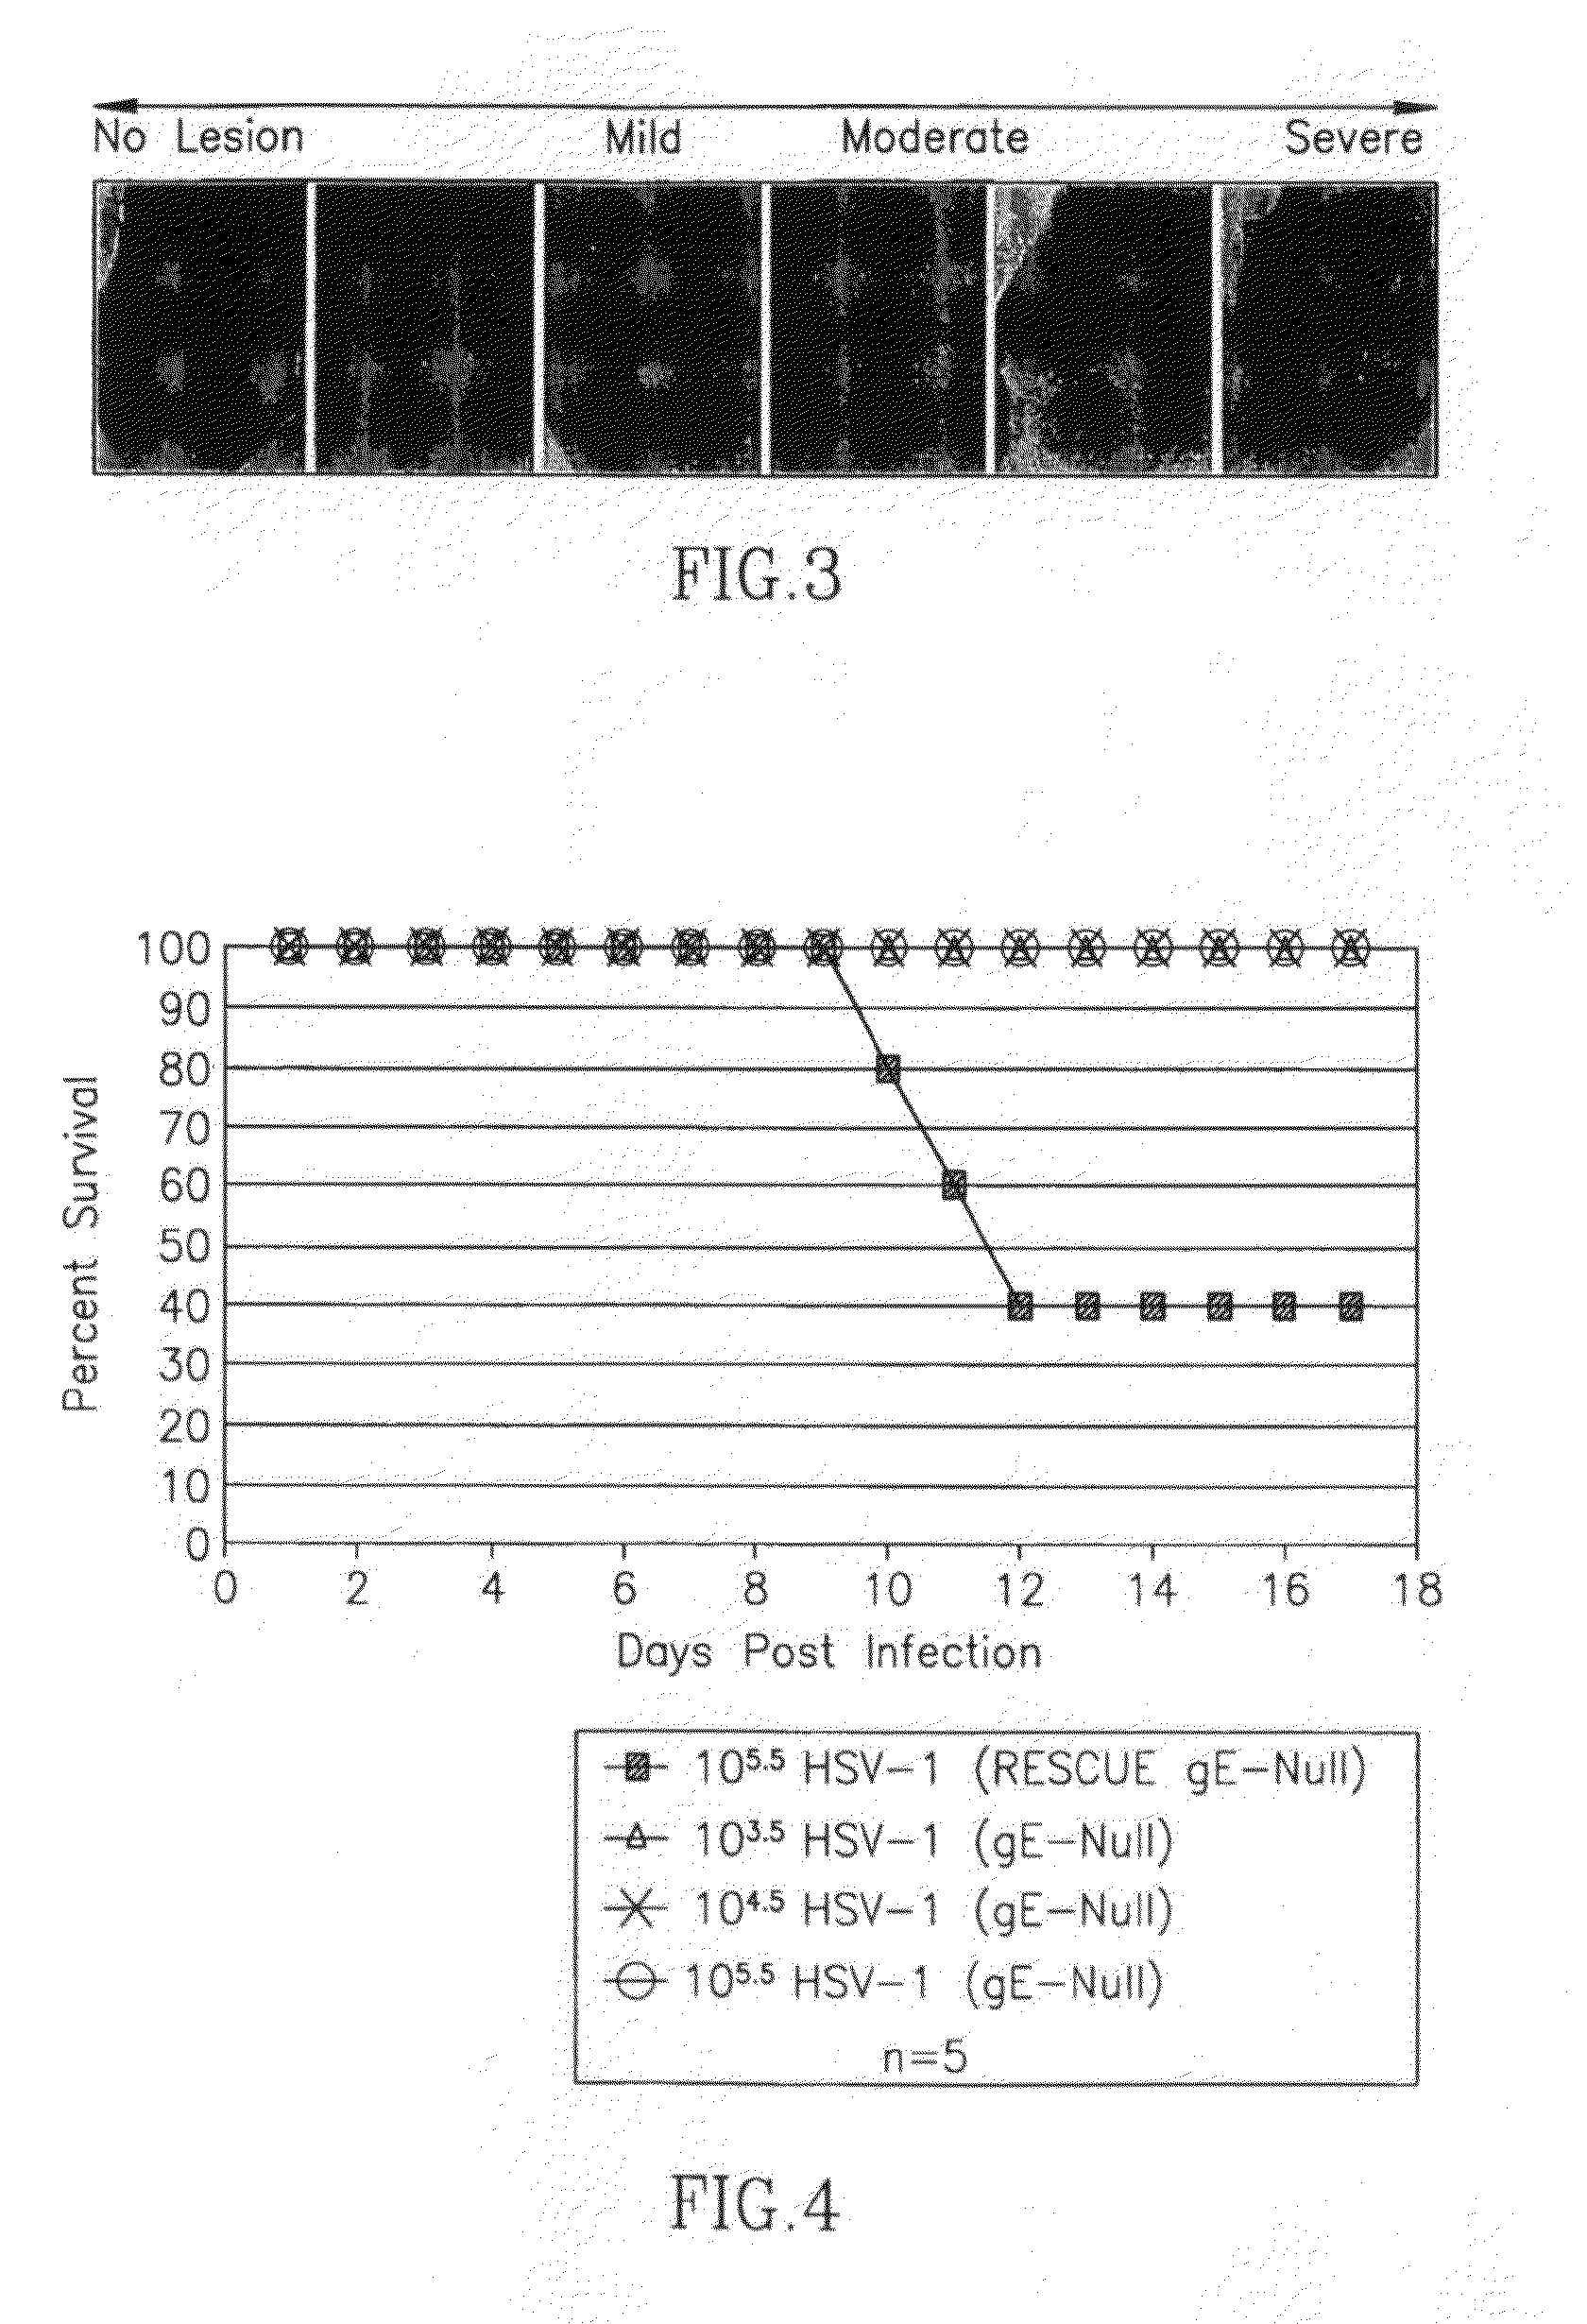 Hsv-1 and hsv-2 vaccines and methods of use thereof